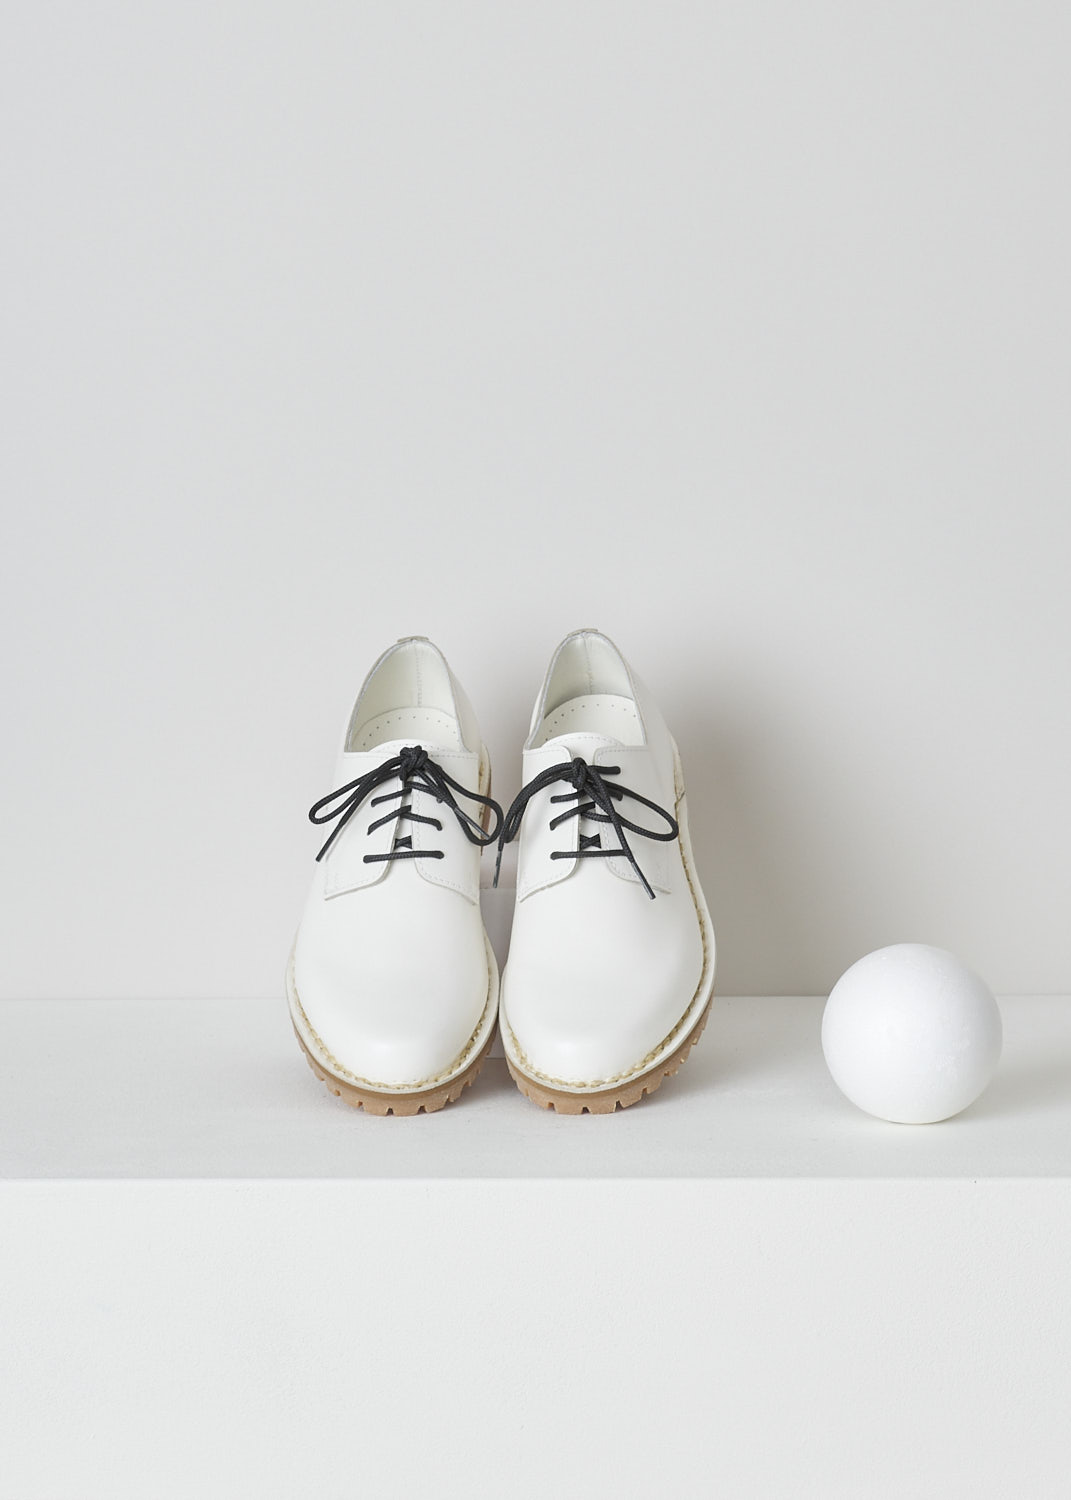 SOFIE Dâ€™HOORE, WHITE DERBY SHOES WITH BLACK LACES, FILOS_LJAZ_WHITE, White, Top, These white leather derby shoes have a round nose and a classic lace-up closing with contrasting black laces. The shoes have sturdy Vibram soles. 

